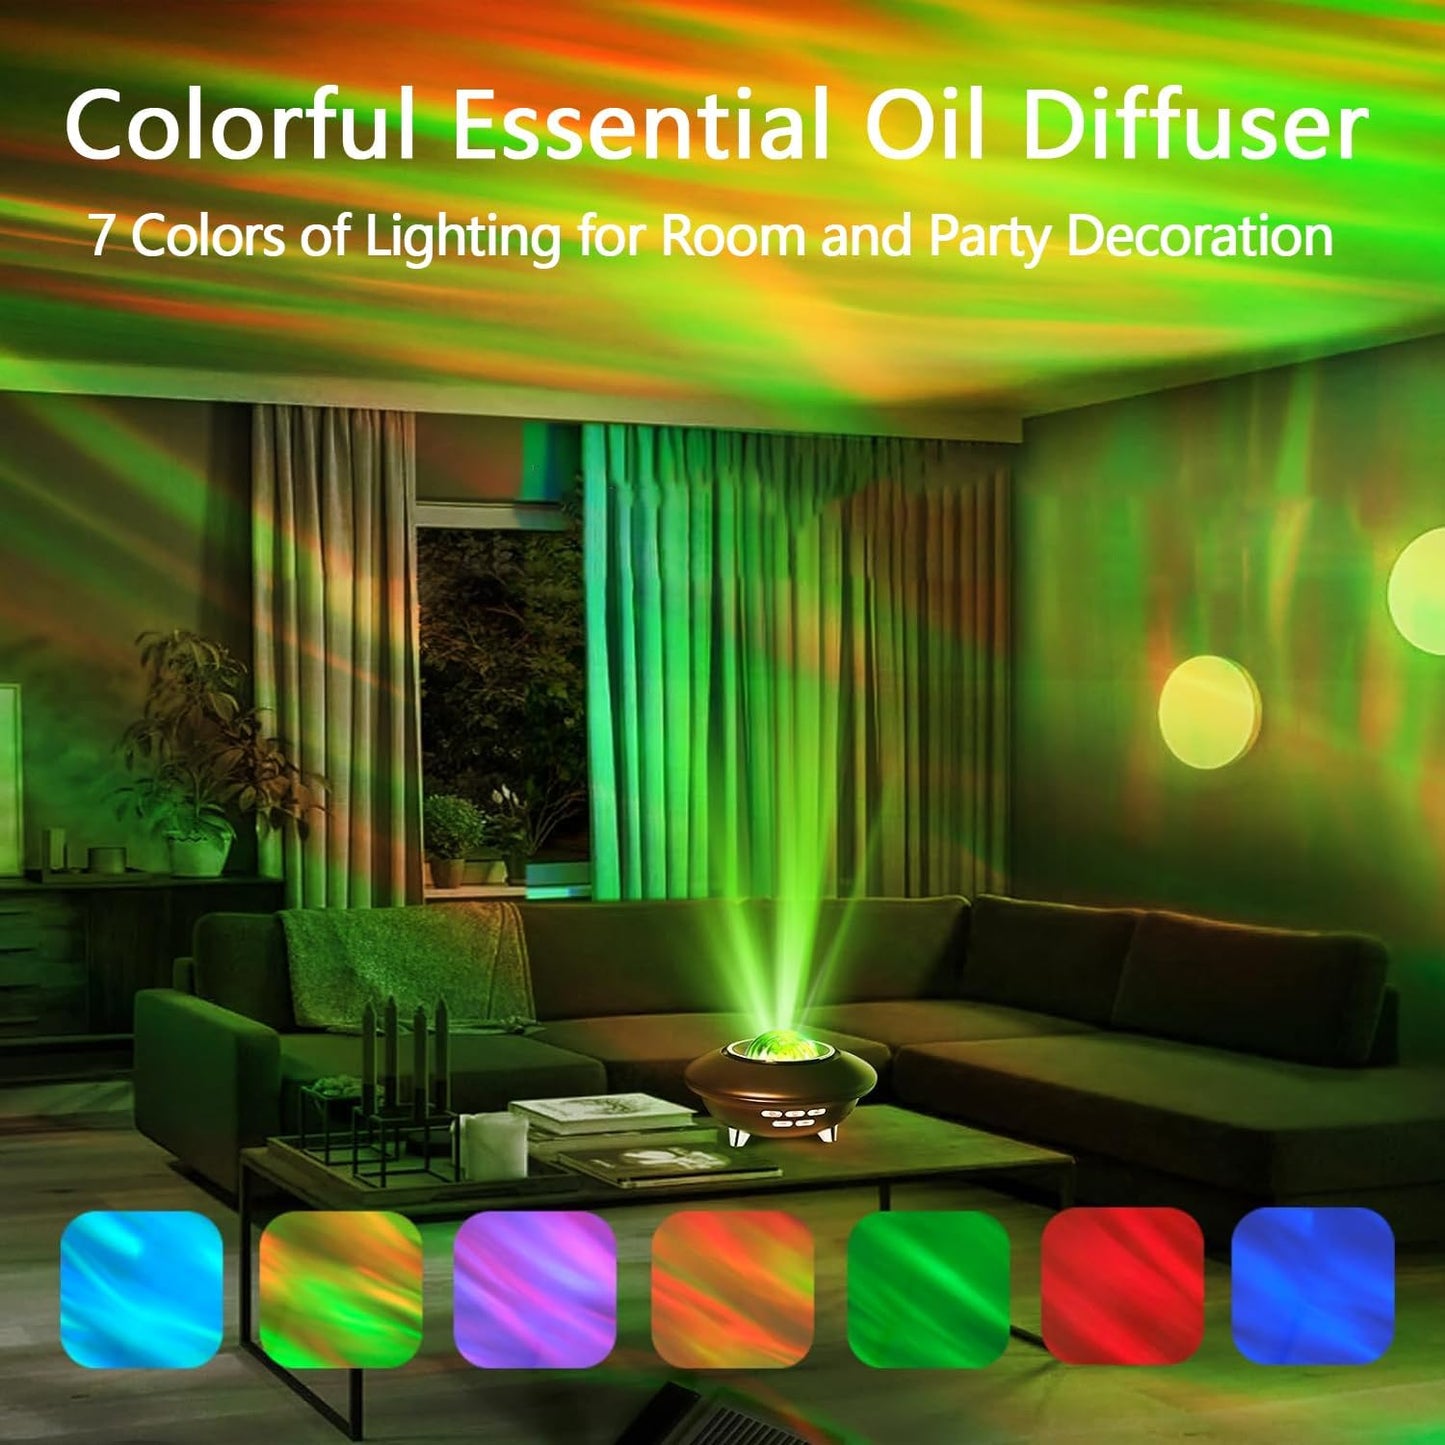 Lotalot Essential Oil Aromatherapy Diffuser White Noise Star Projector,8 Colors Ultrasonic Cool Mist Humidifier Scent Diffuser,Waterless Auto Shut-Off,2 Mist Modes for Home Hotel Office 120 ML-Black